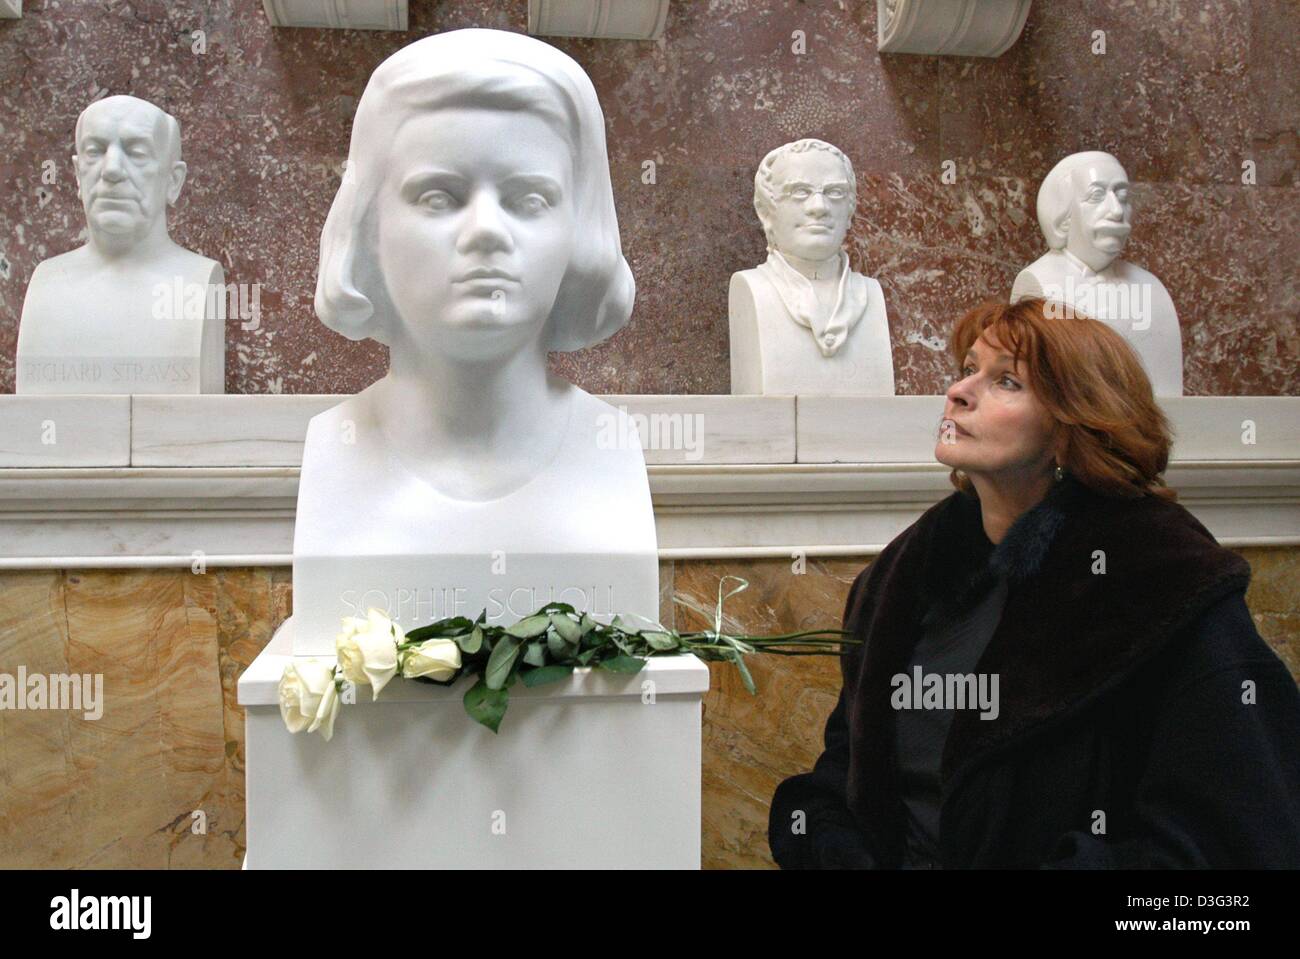 (dpa) - Actress Senta Berger stands next to the newly-unveiled bust of Nazi resistance fighter Sophie Scholl in the Walhalla in Donaustauf, southern Germany, 22 February 2003. A bunch of white roses lie in front of the bust. Sophie Scholl was a member of the 'Weisse Rose' (white rose) resistance group and was beheaded 60 years ago by the Nazis. The bust is the 127th marble bust in  Stock Photo